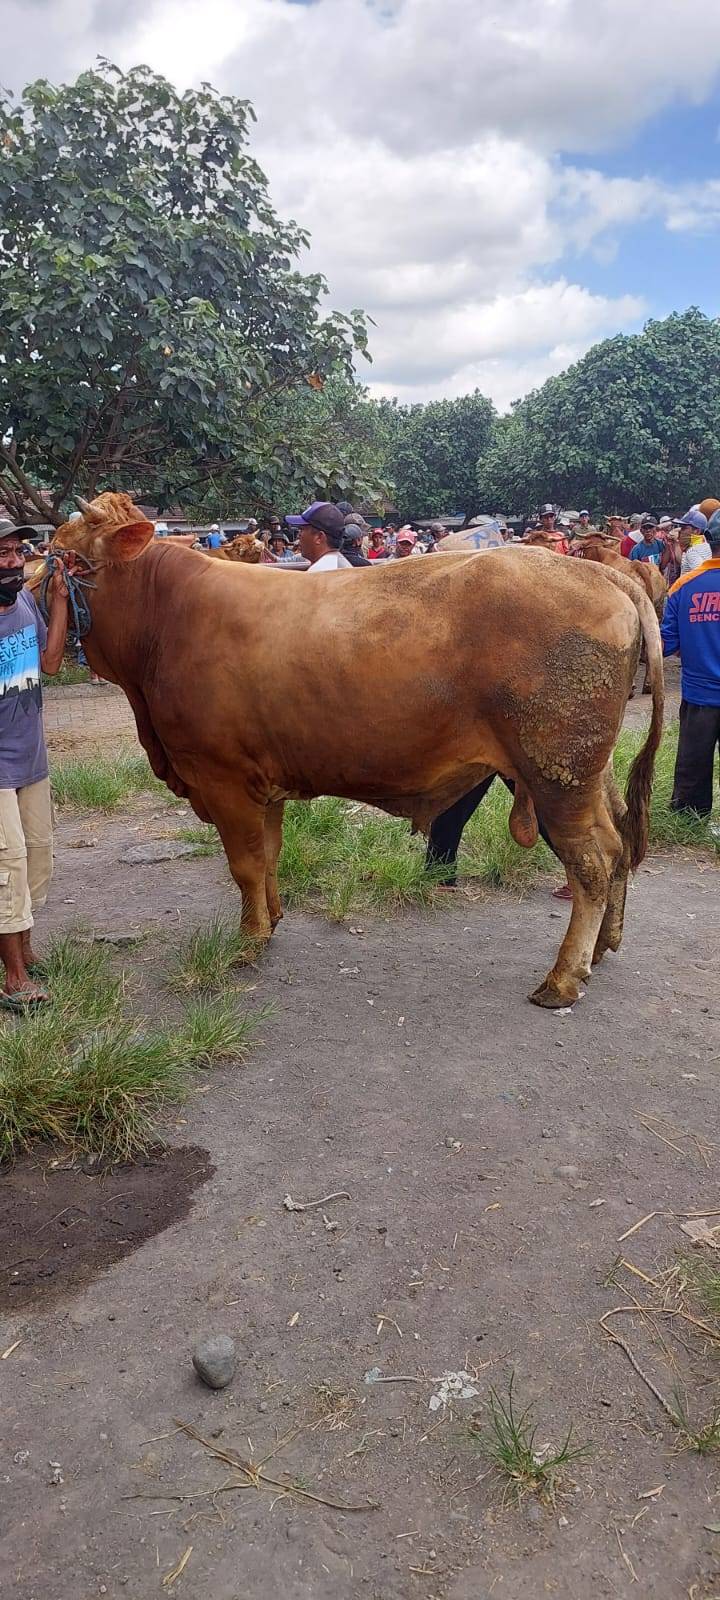 You are currently viewing Jual Domba Qurban Terpercaya Di Bogor